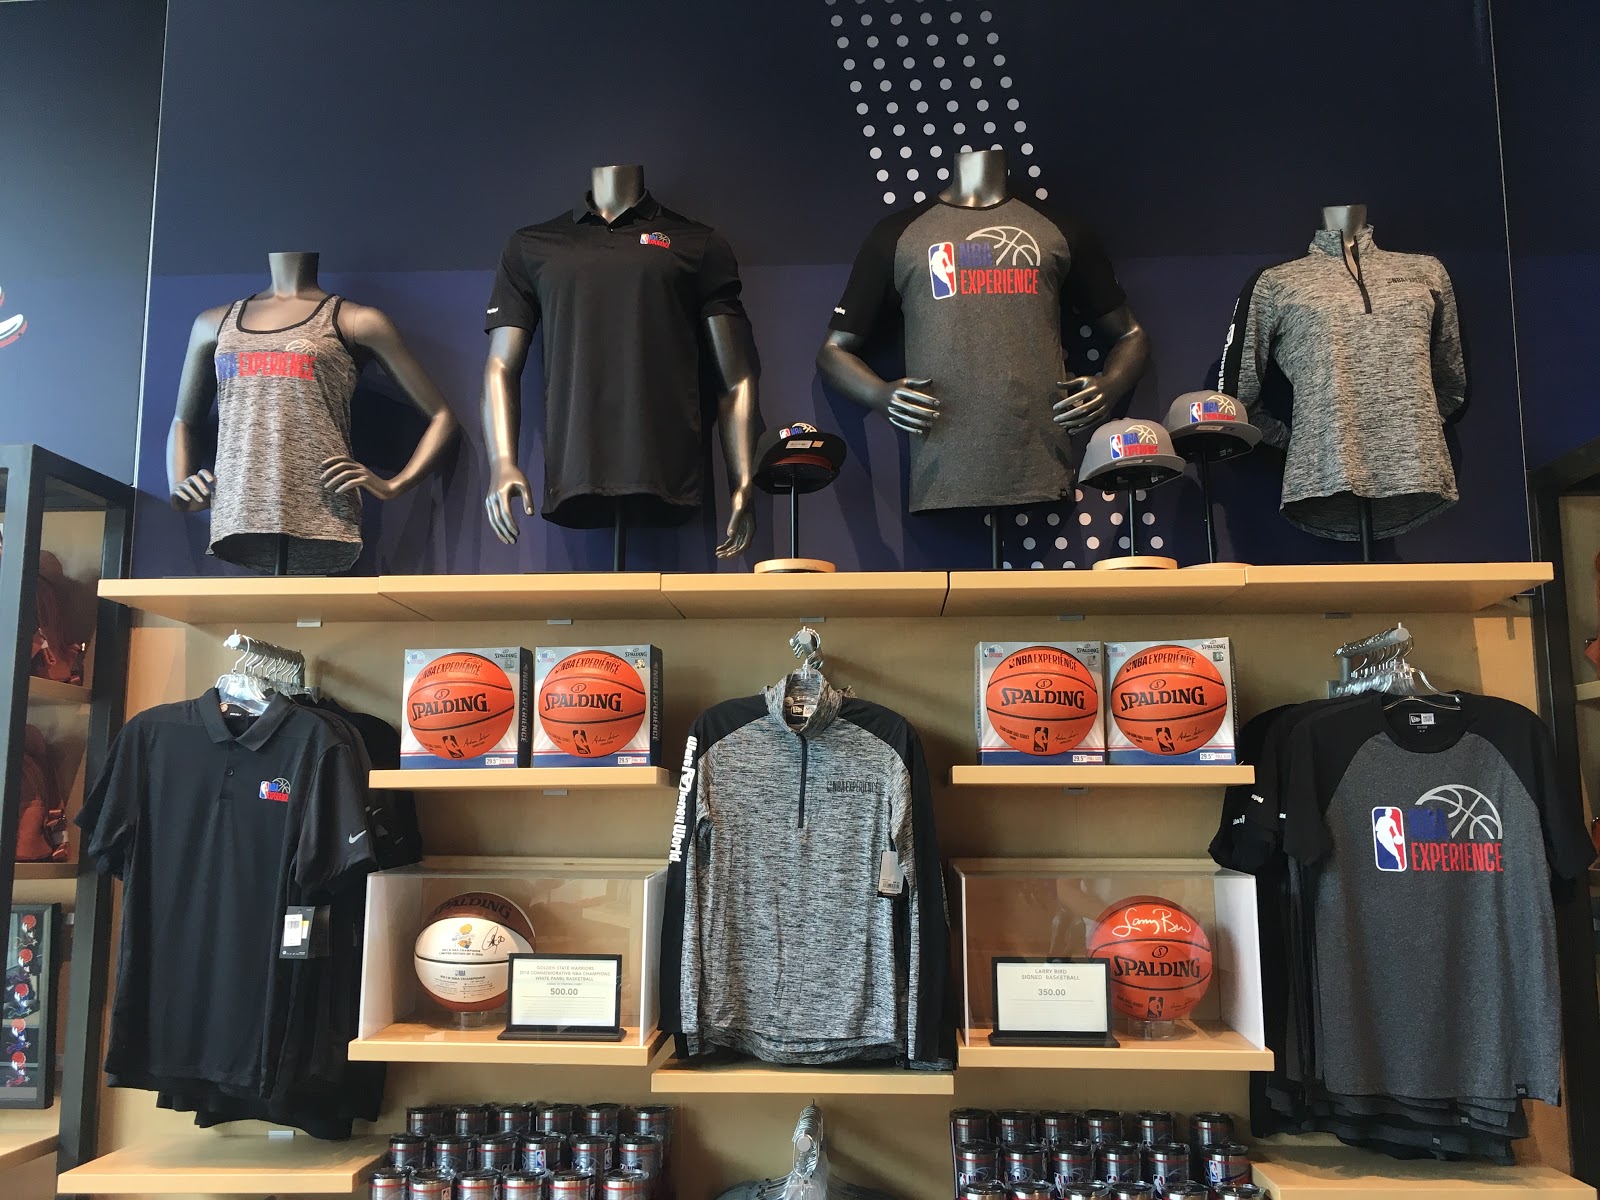 NBA Store opens ahead of NBA Experience at Disney Springs